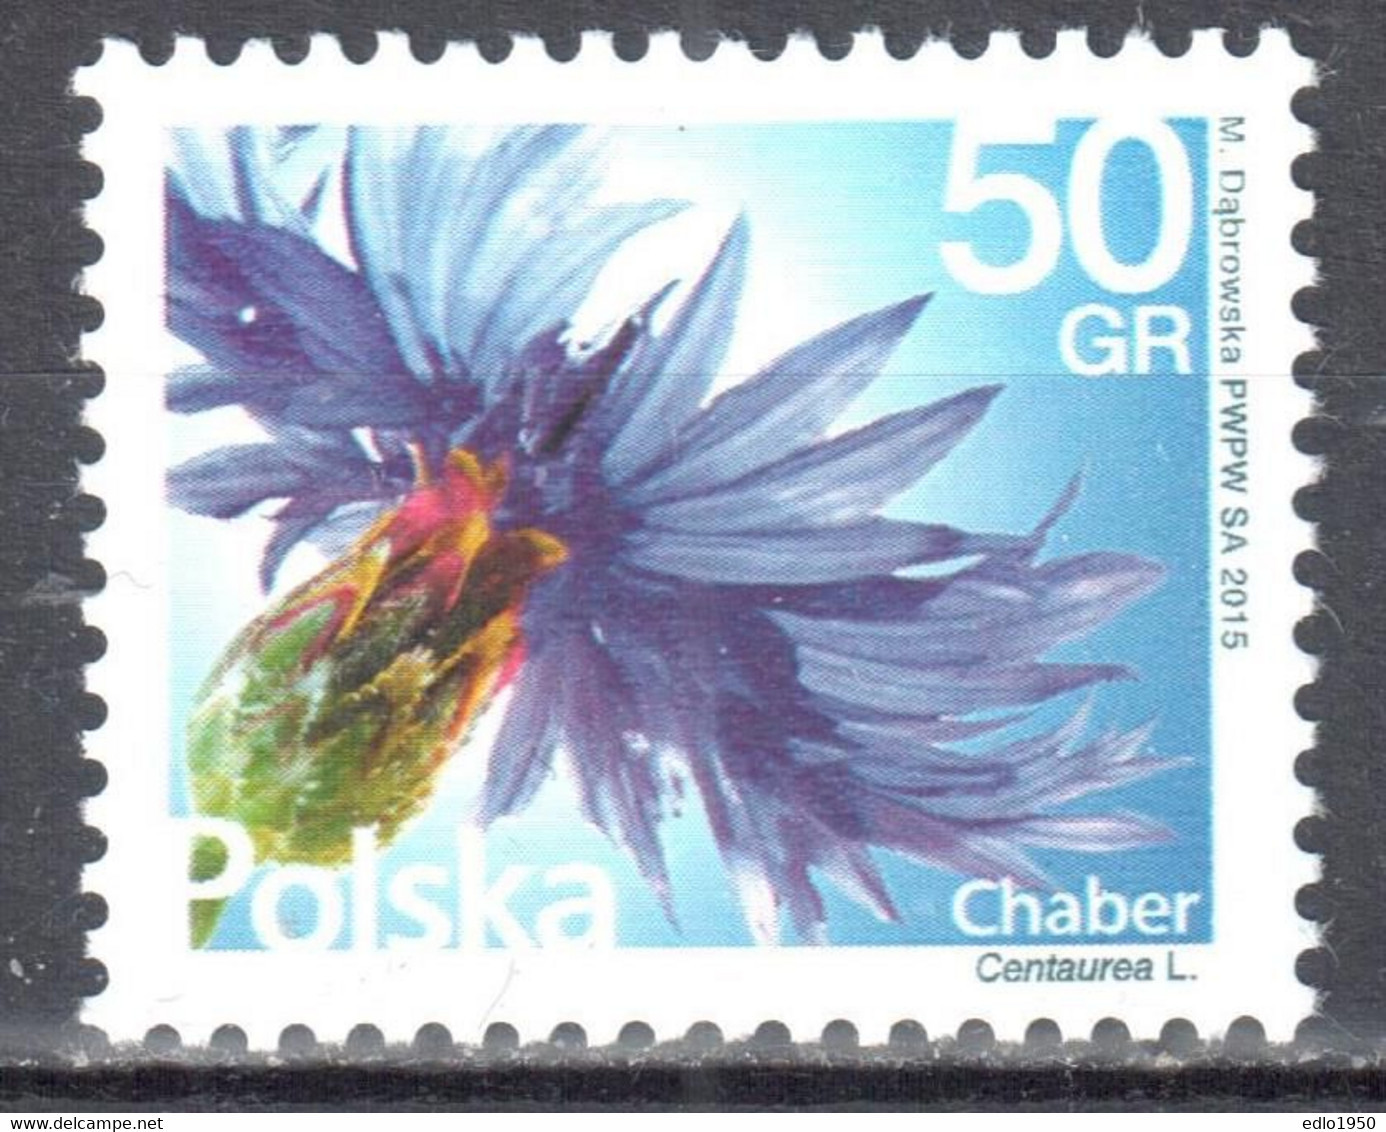 Poland 2016 - Flowers And Fruits - Mi.4816 - MNH (**) - Unused Stamps